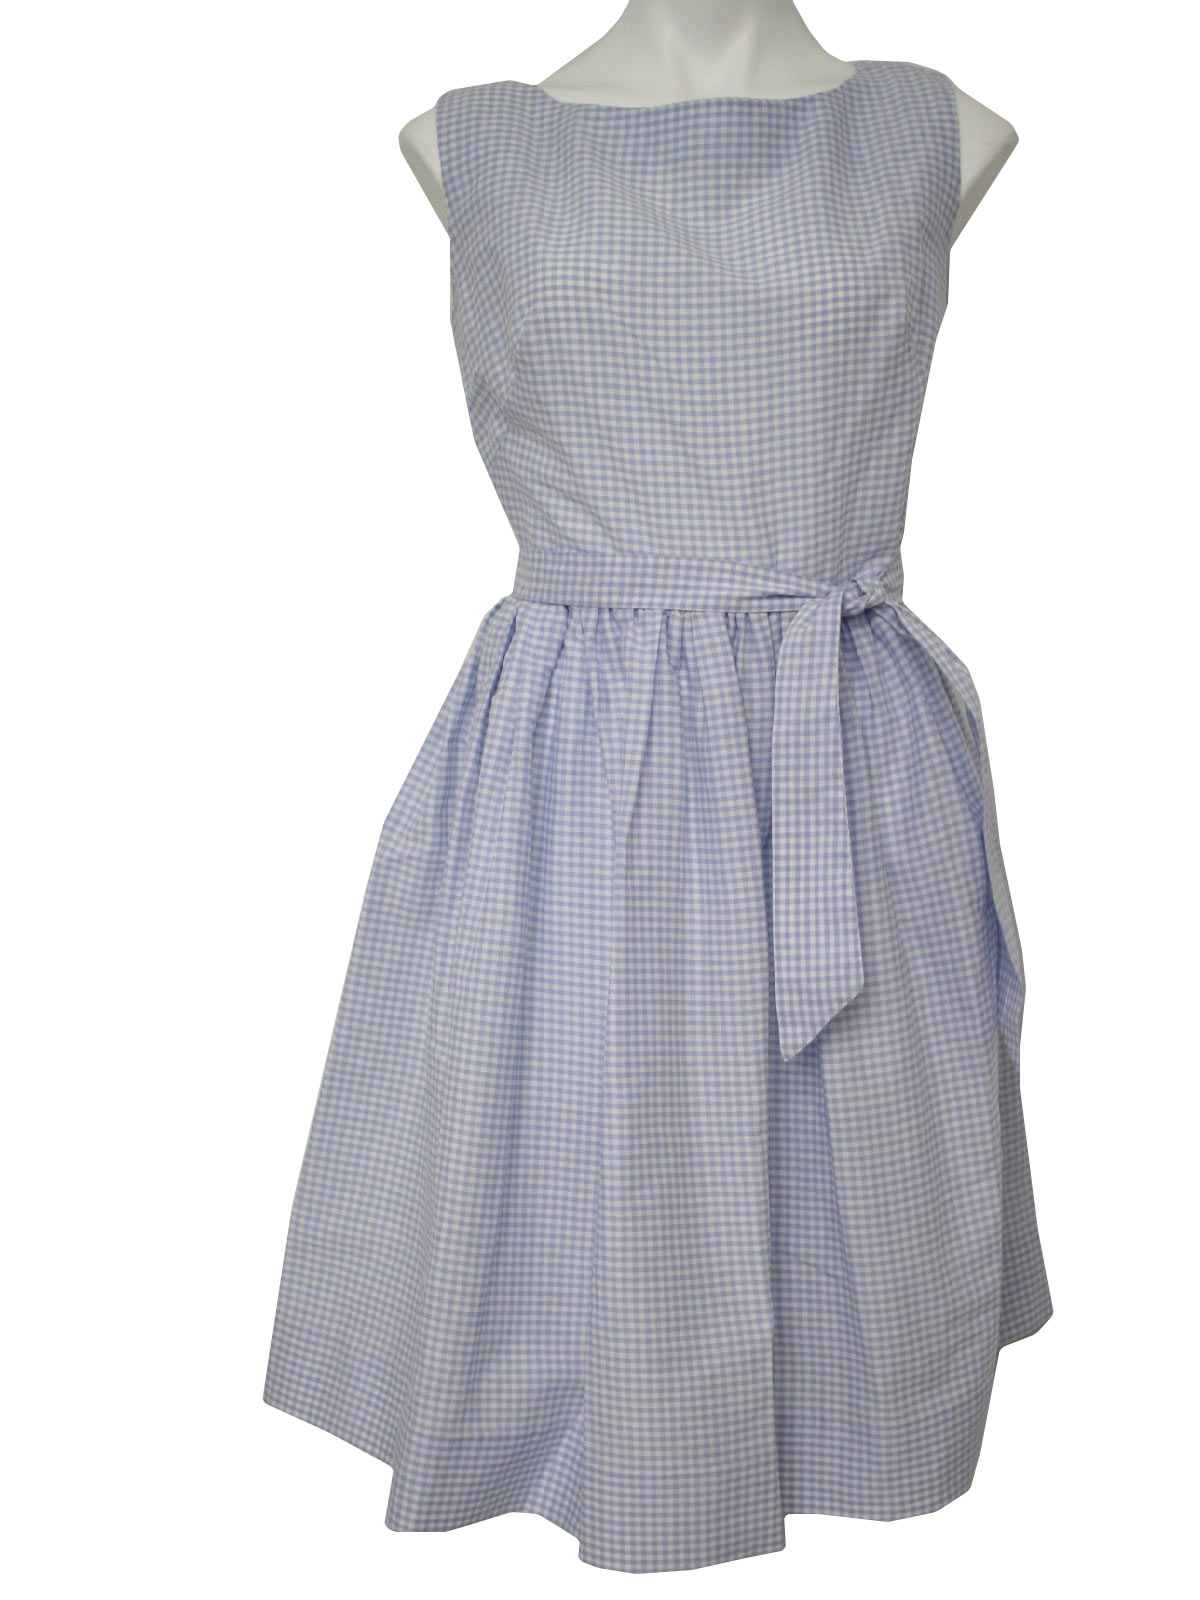 Retro 1960s Dress: Early 60s -Home Sewn- Womens white and light blues ...